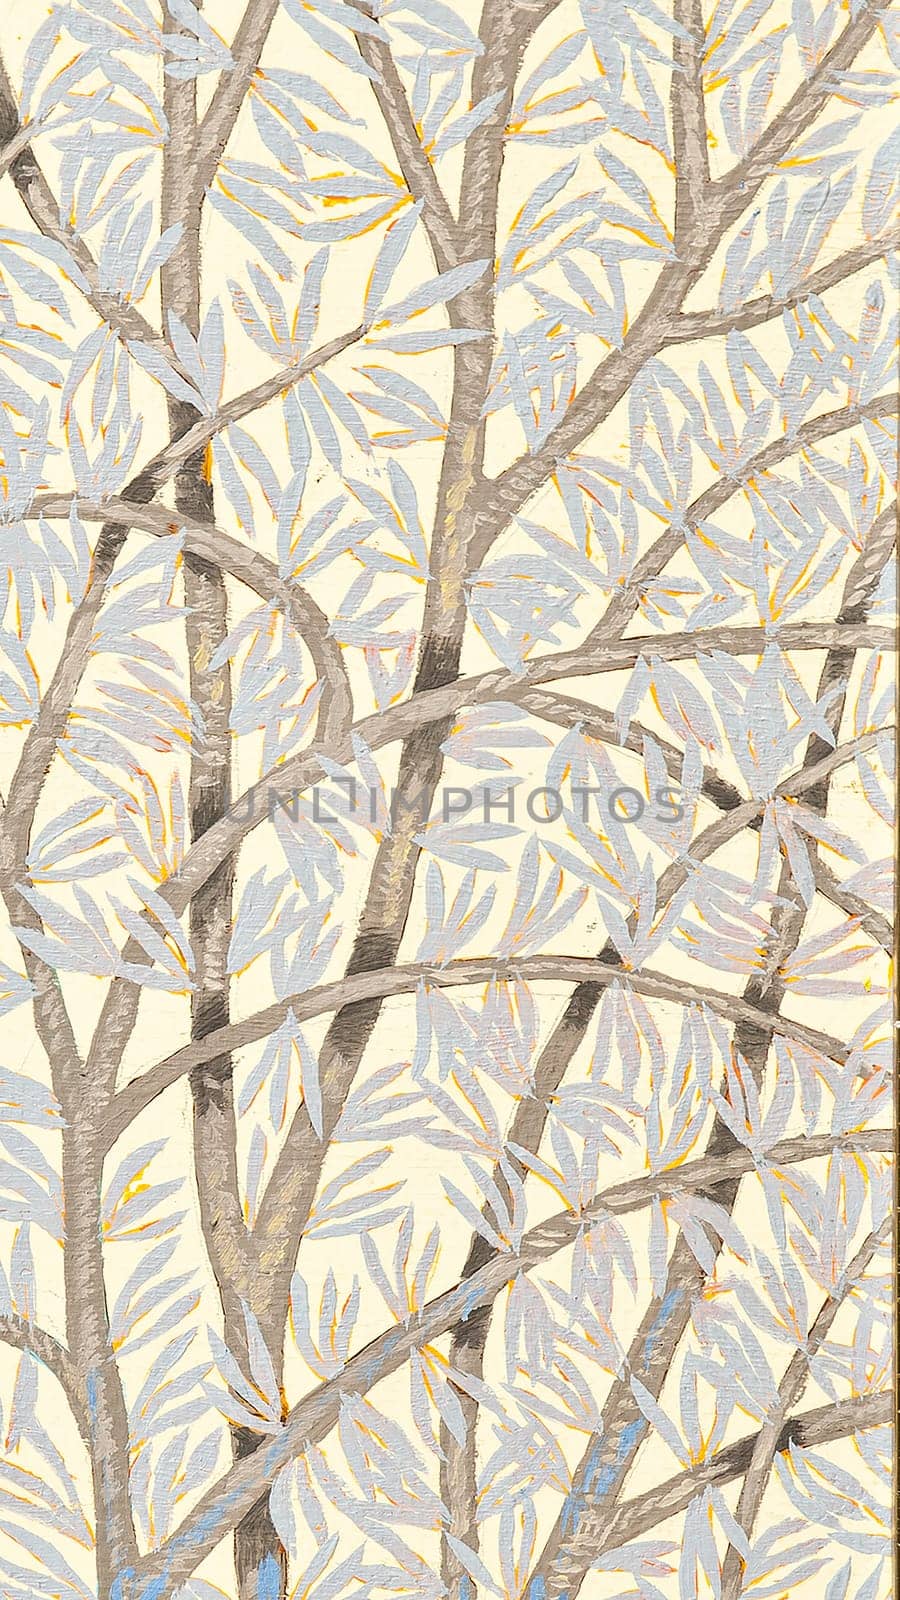 A vertical illustrated design of tree branches with leaves on a beige background